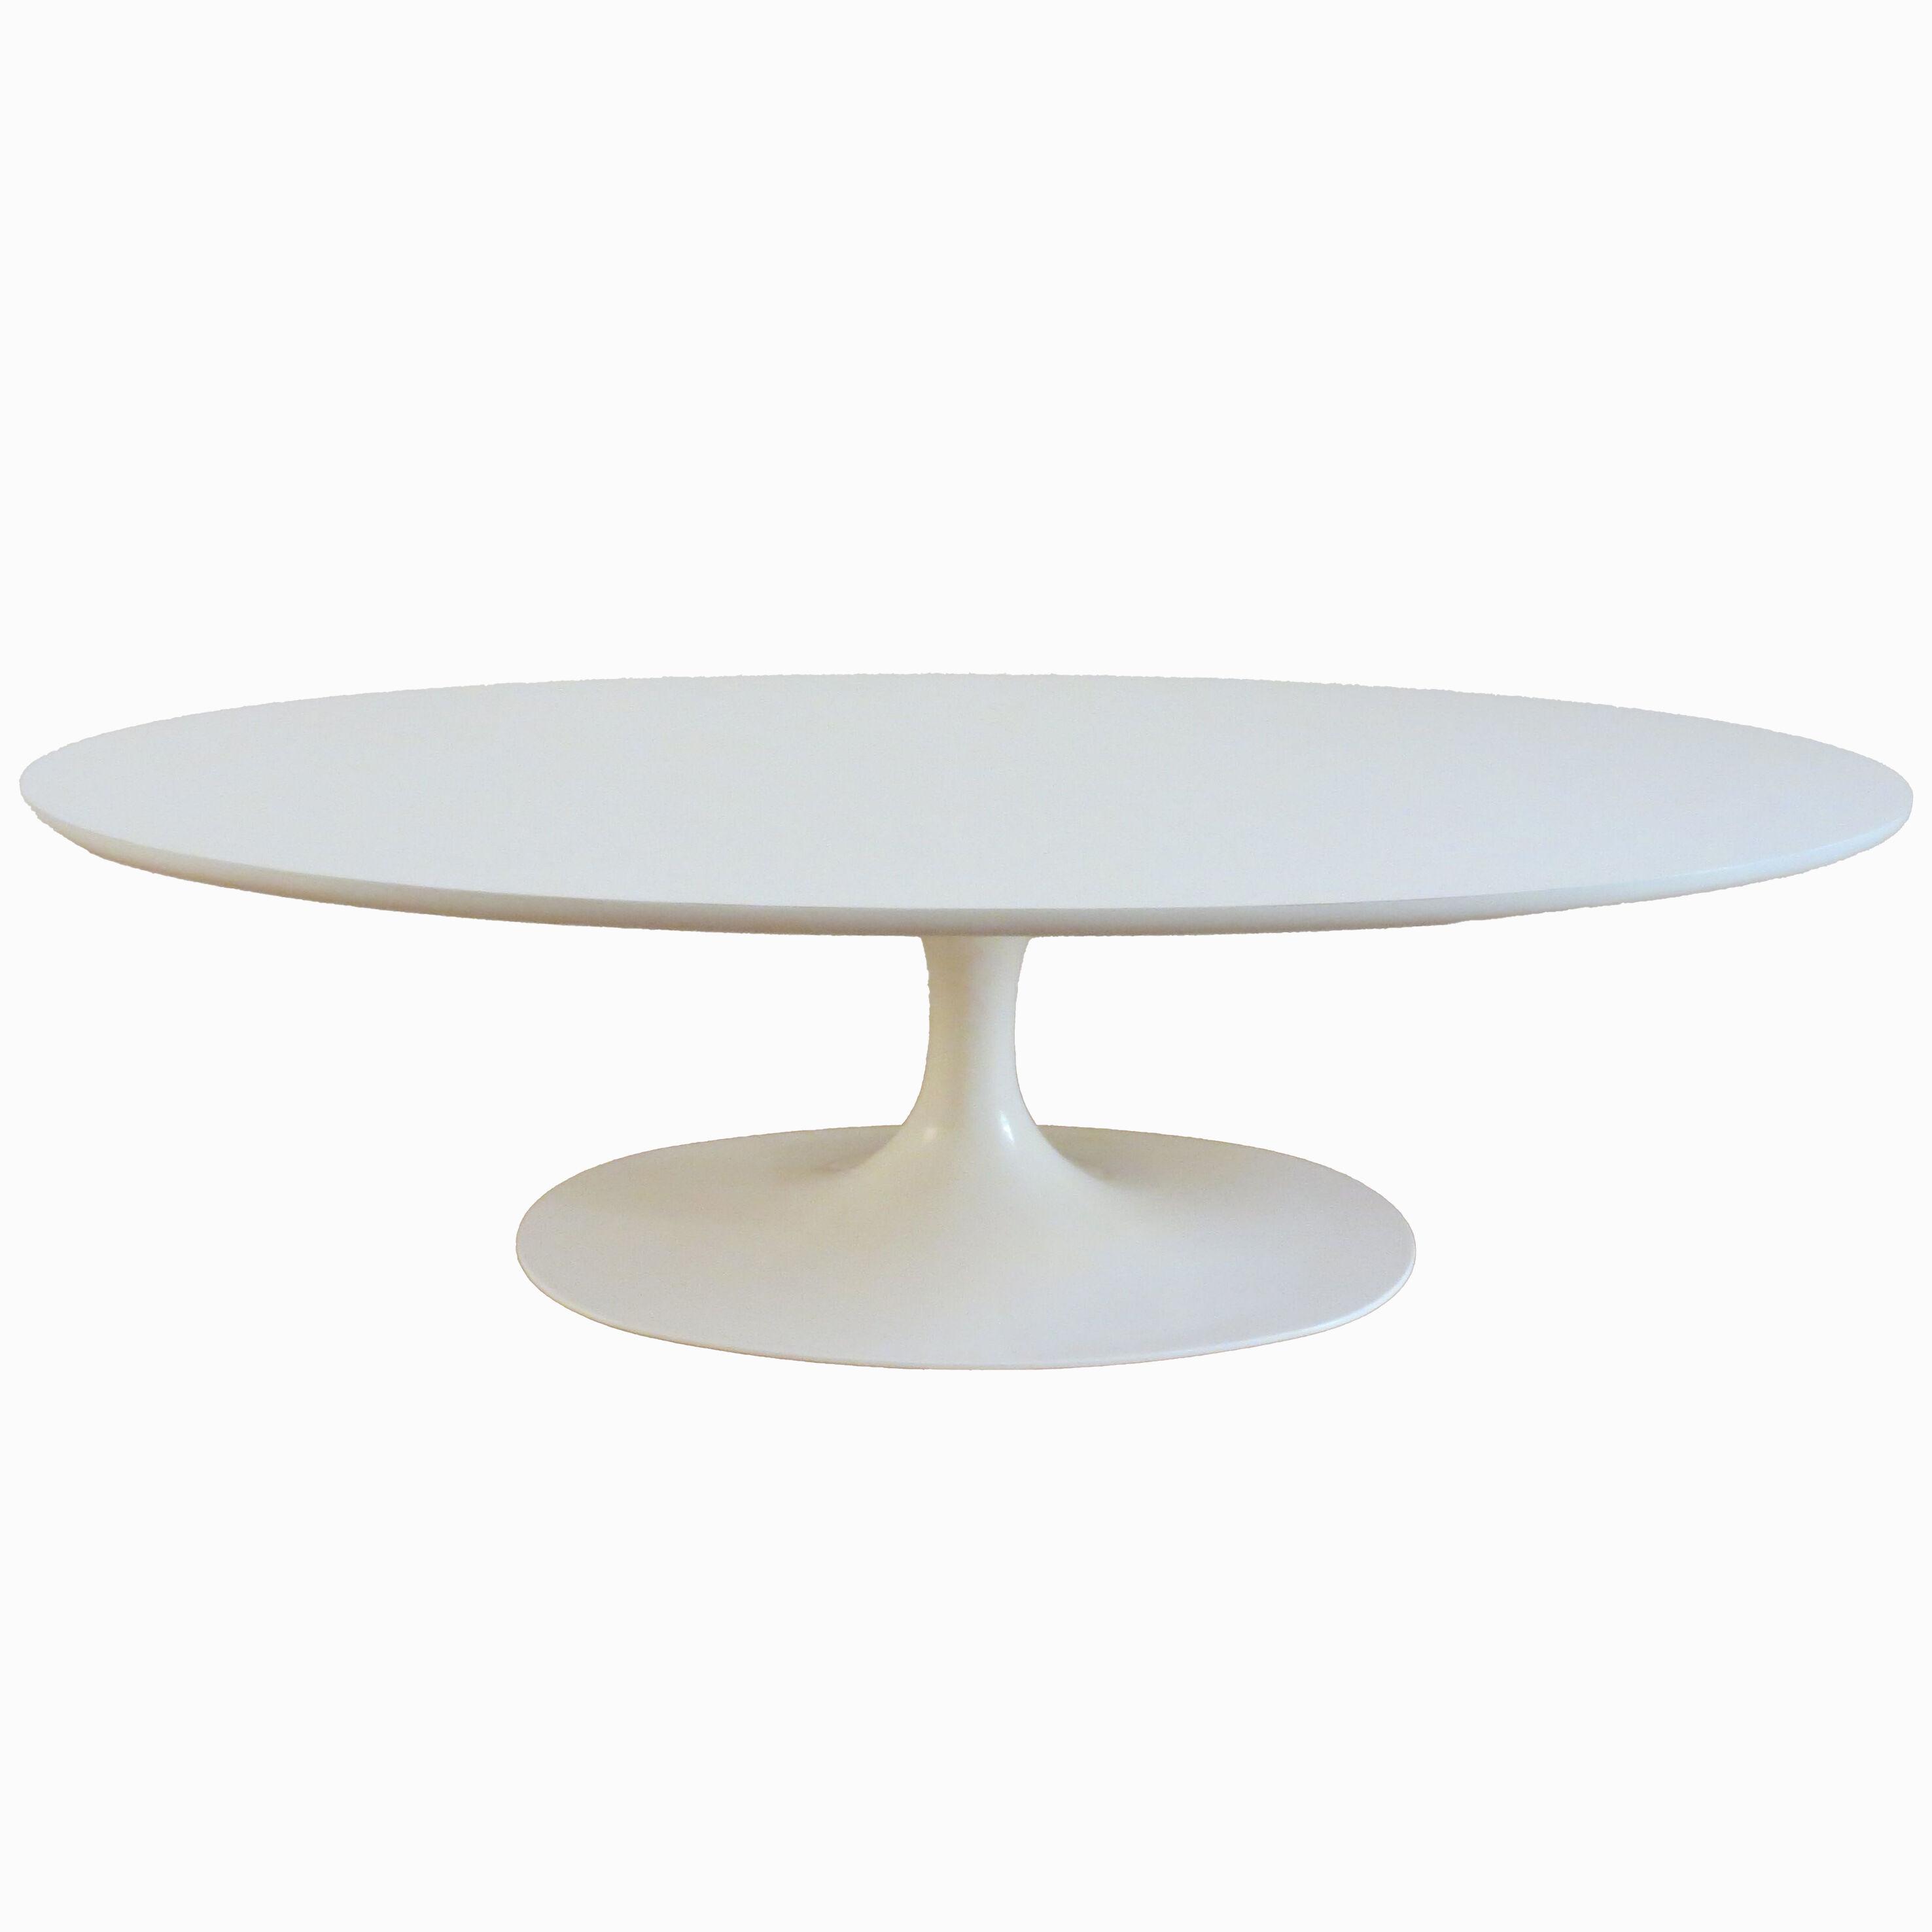 1960s White Oval Tulip Coffee Table By Maurice Burke For Arkana Uk